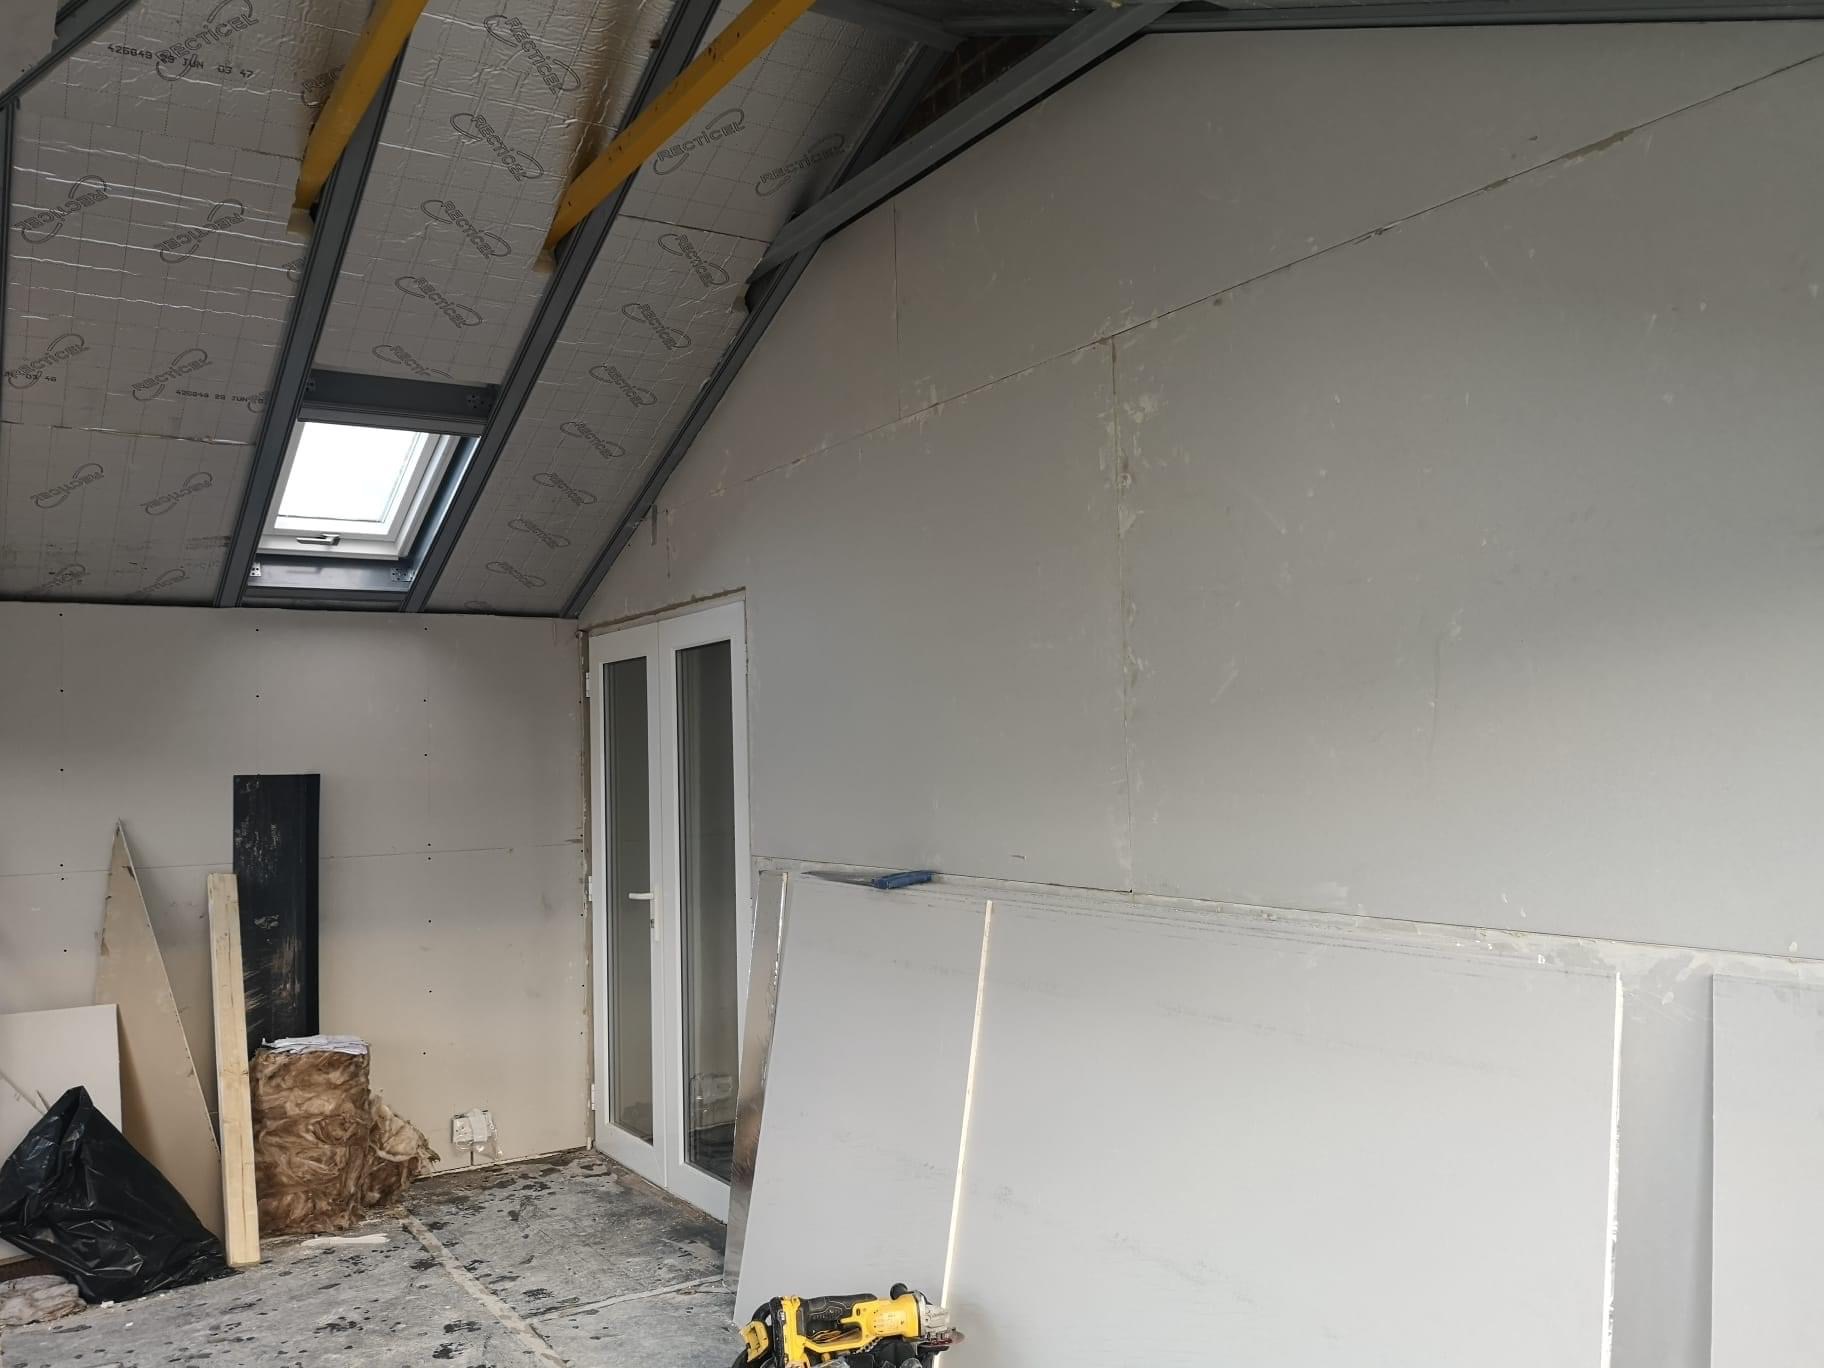 View of conservatory under construction with plaster boards